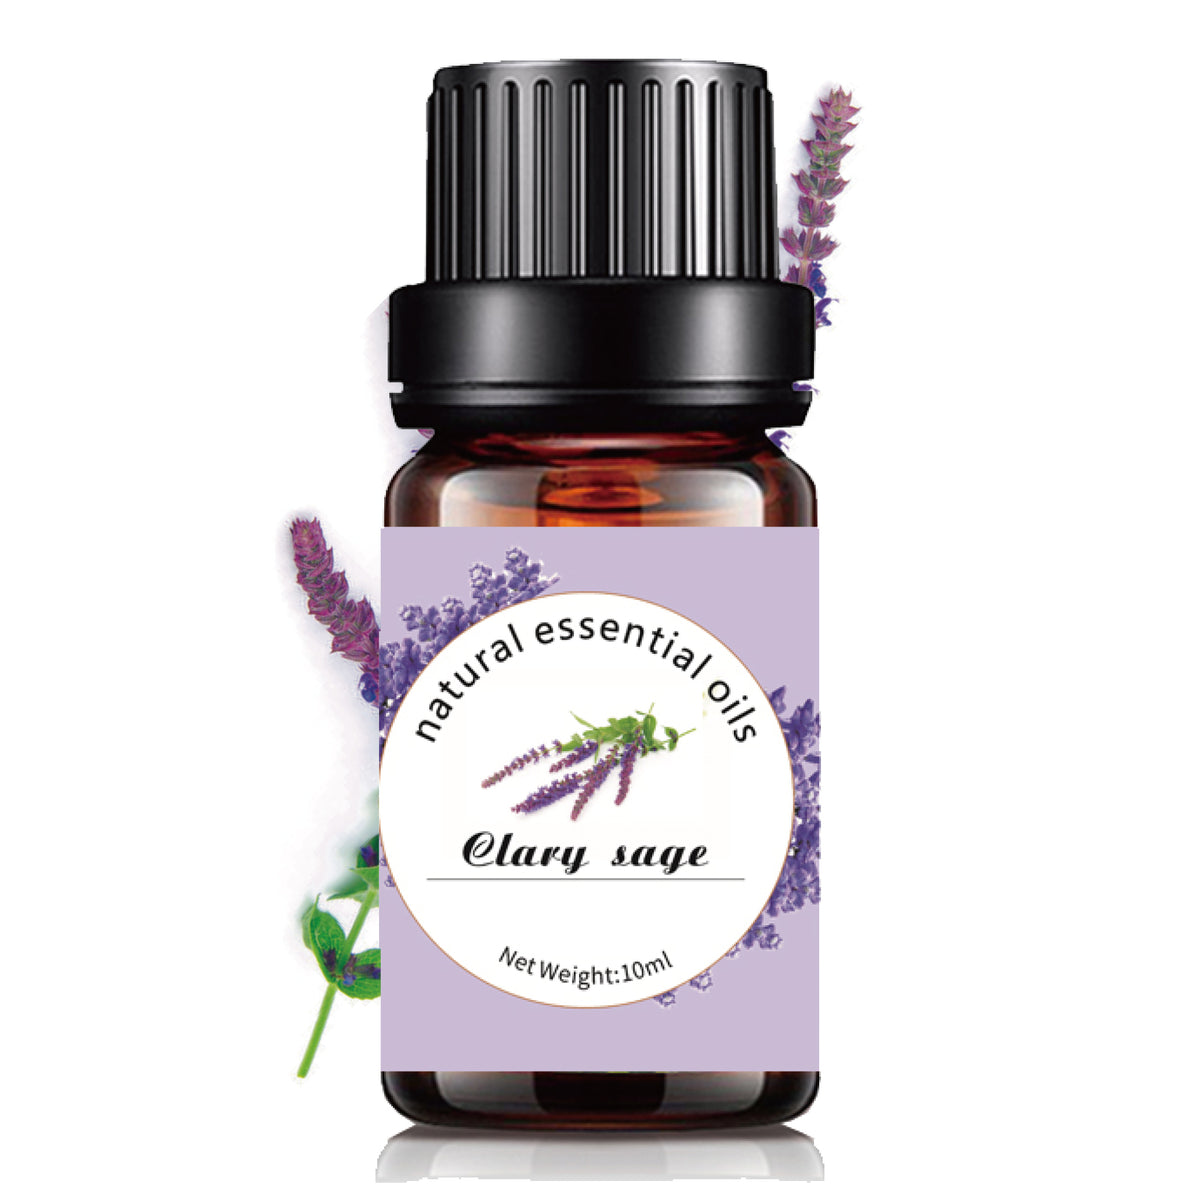 Clary Sage - 10ml pure natural essential oil